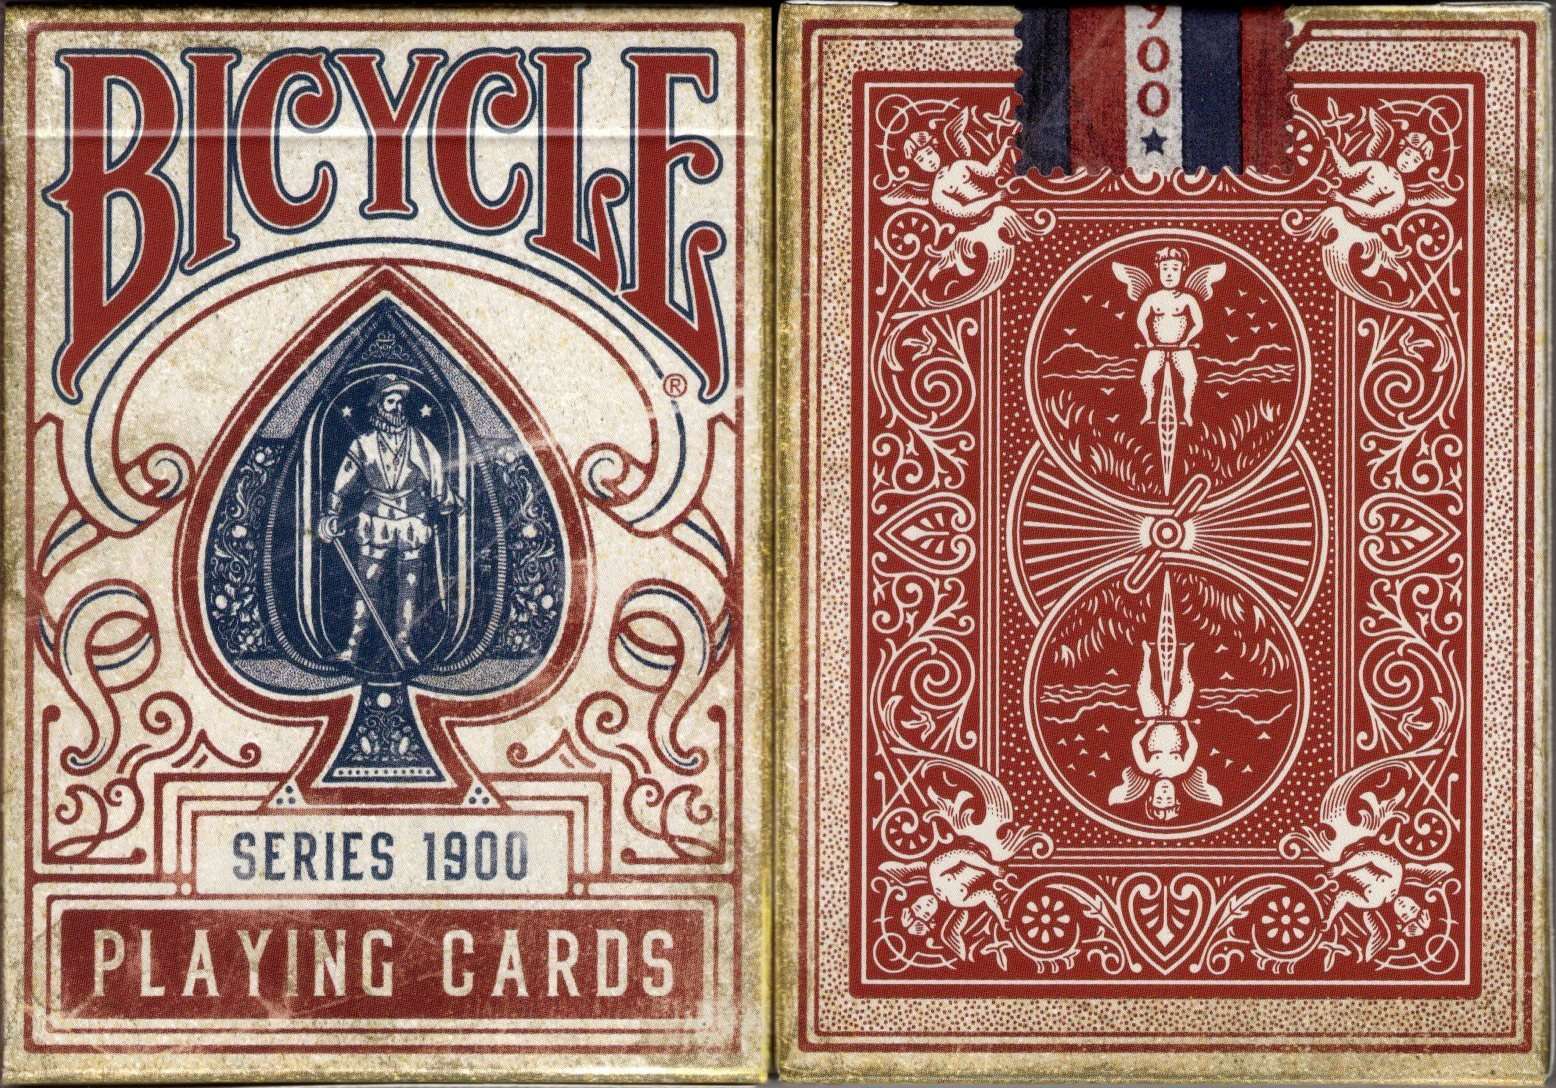 PlayingCardDecks.com-1900 Series Red Marked Bicycle Playing Cards